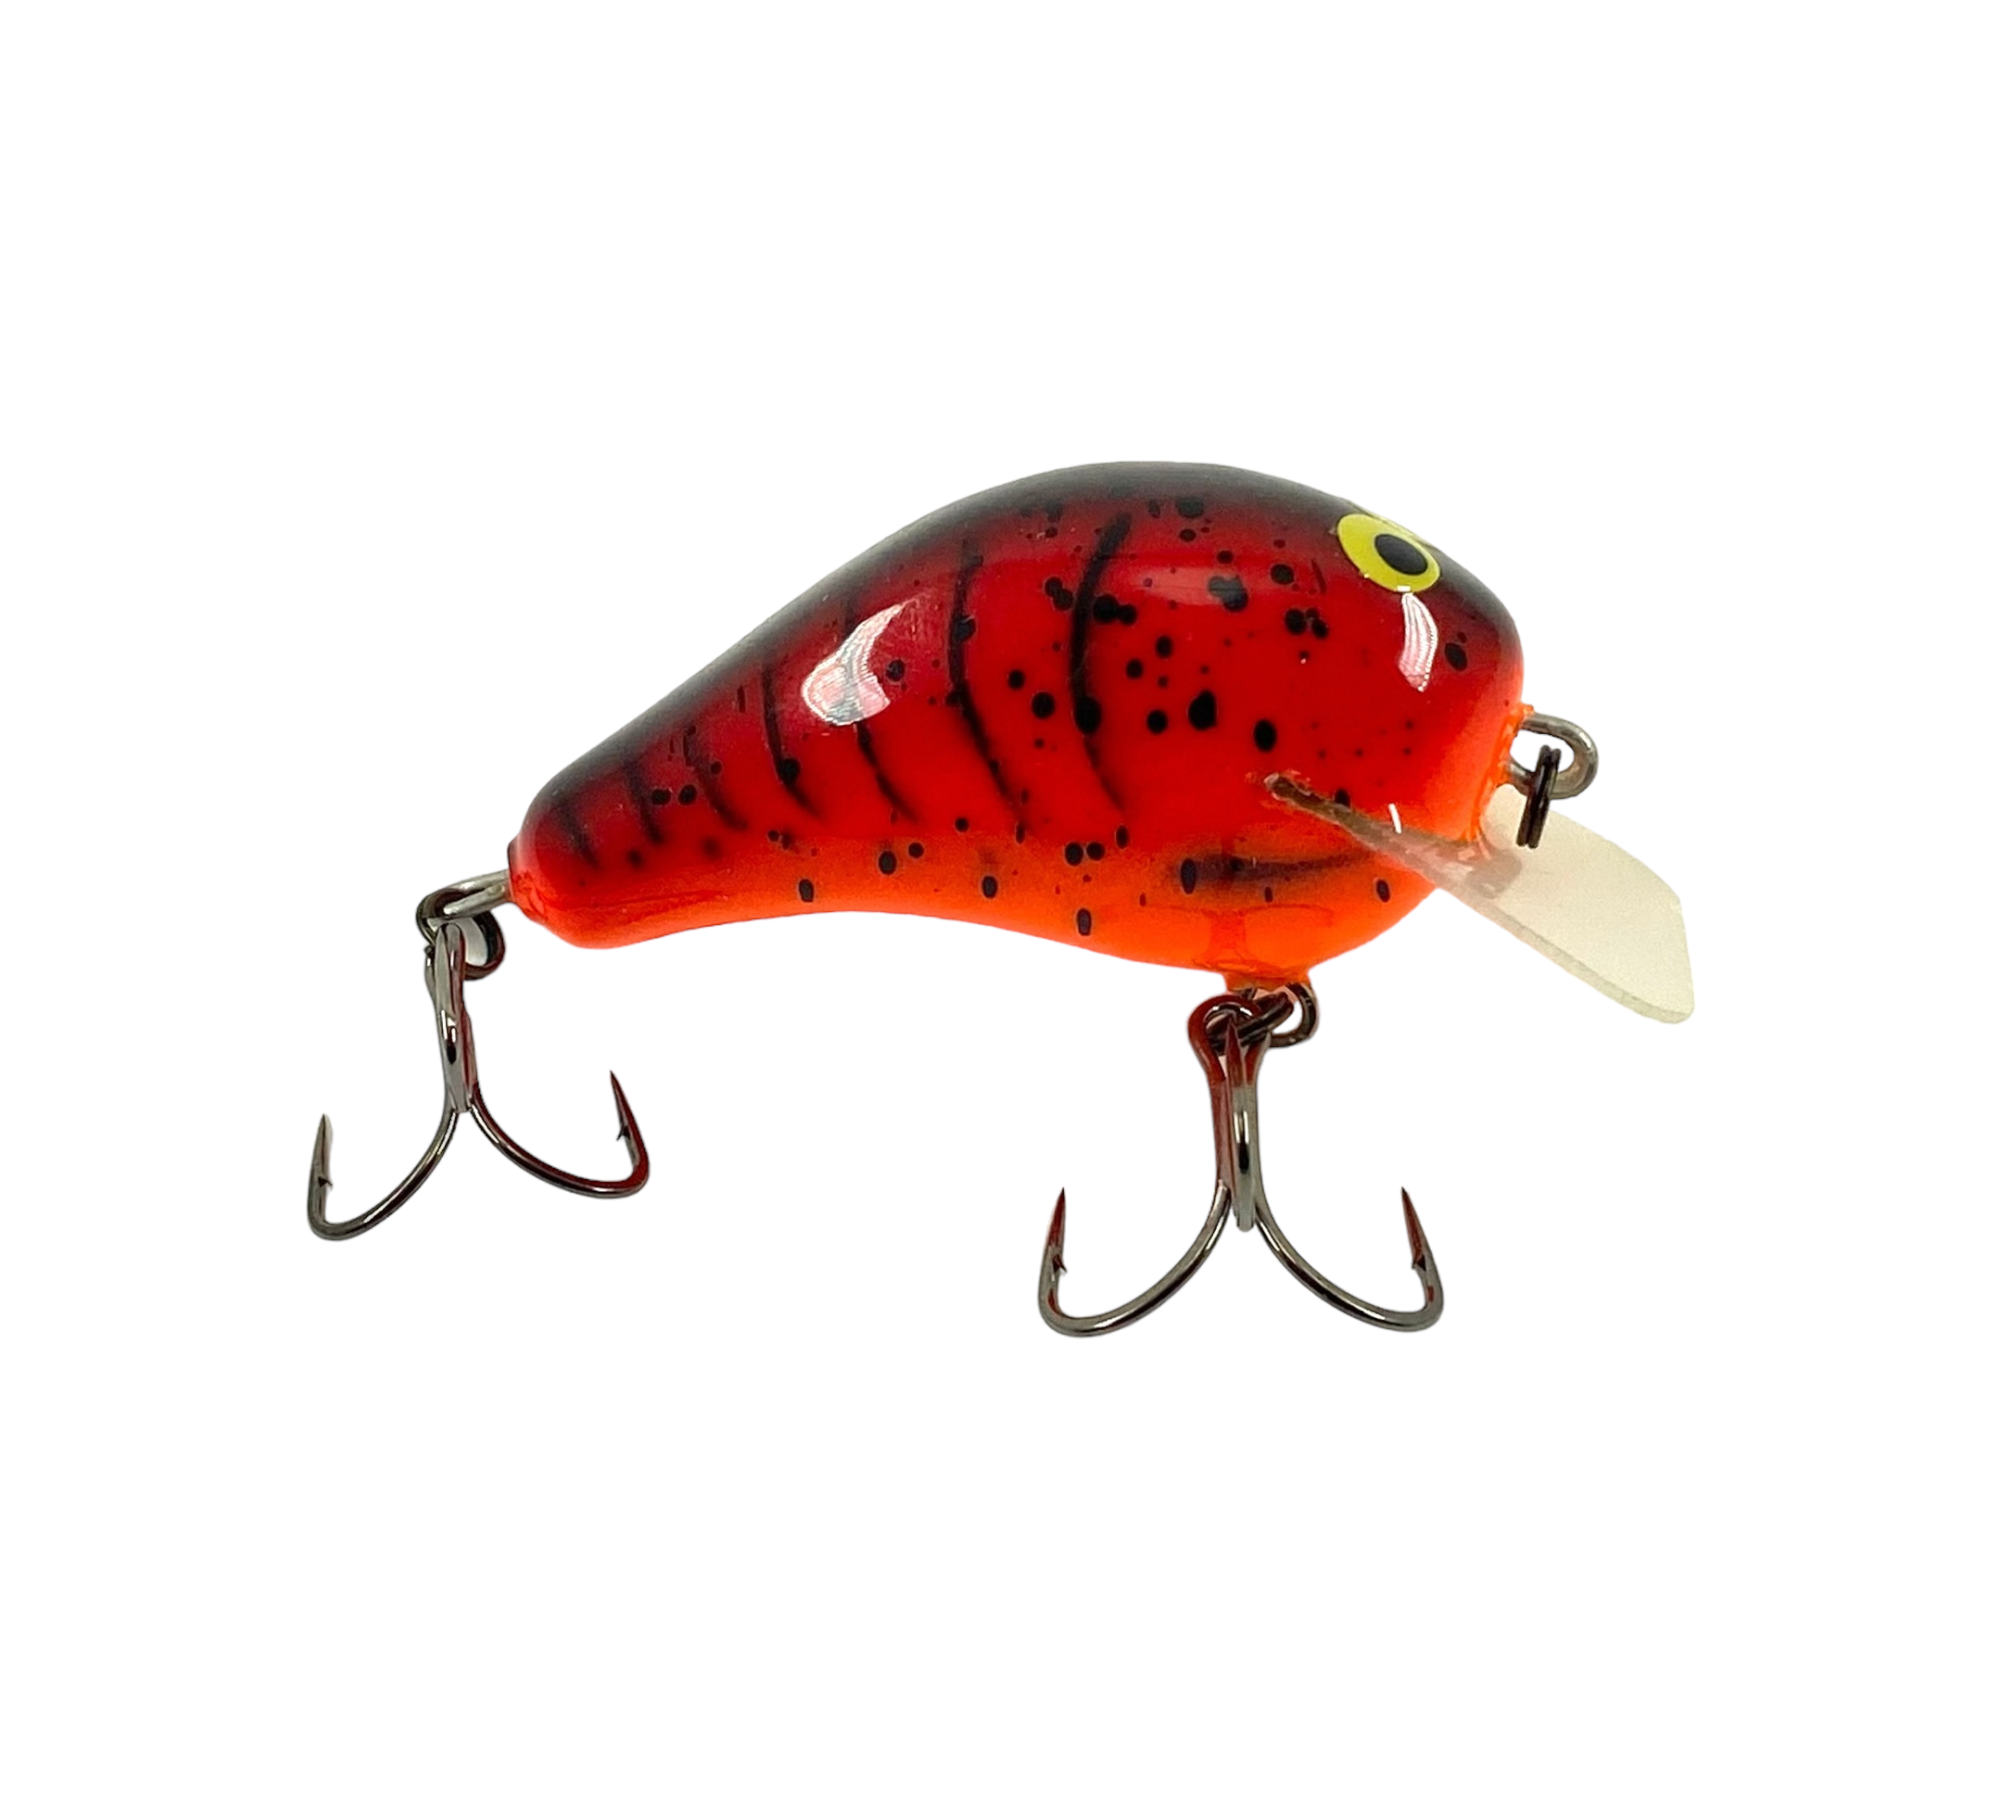 PH CUSTOM LURES LIL HUNTER HANDCRAFTED BALSA Fishing Lure – Toad